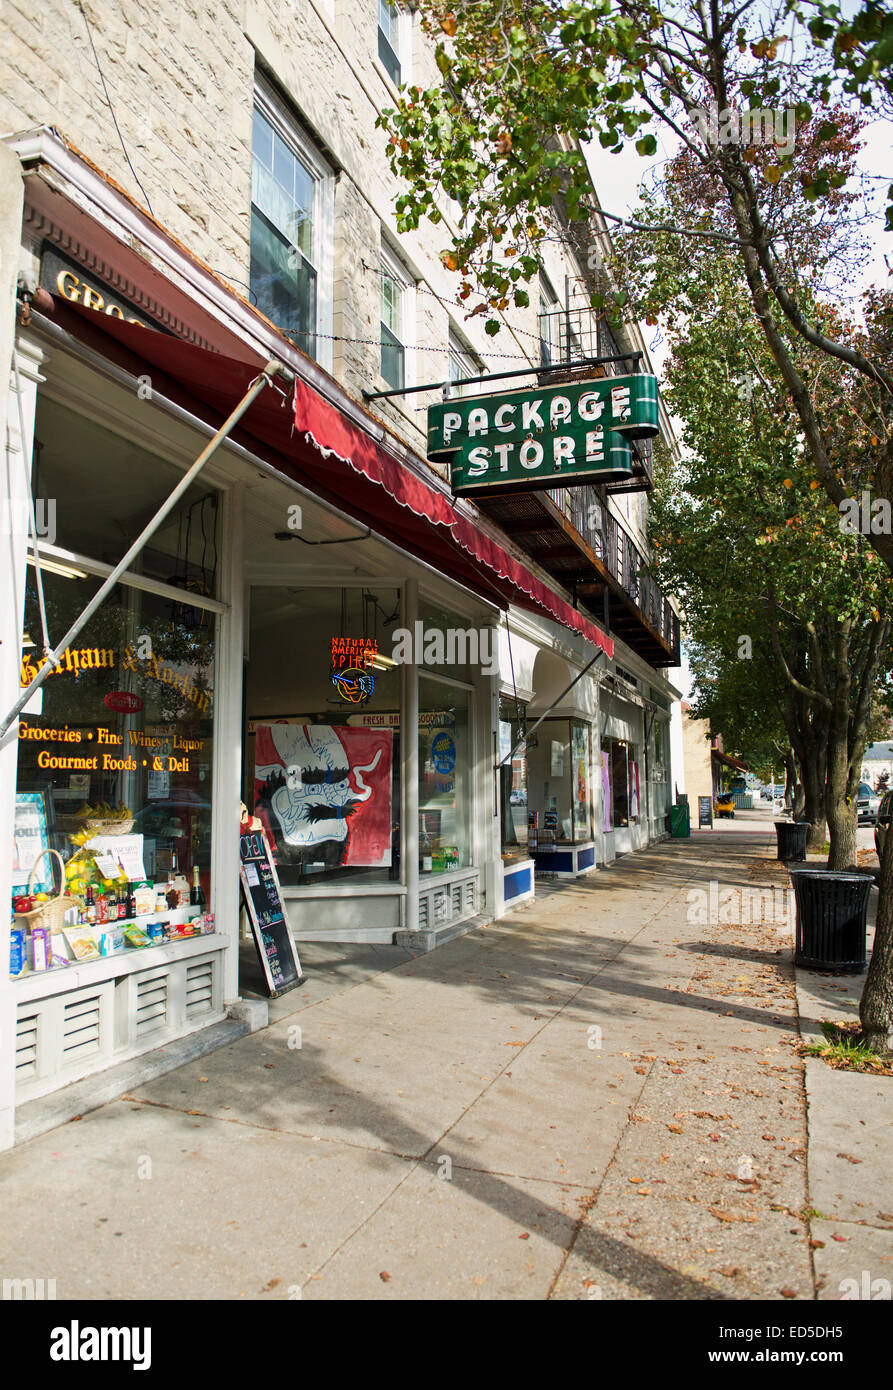 Storefront and walkway in the town of Great Barrington, Massachusetts, Berkshire County, USA Stock Photo